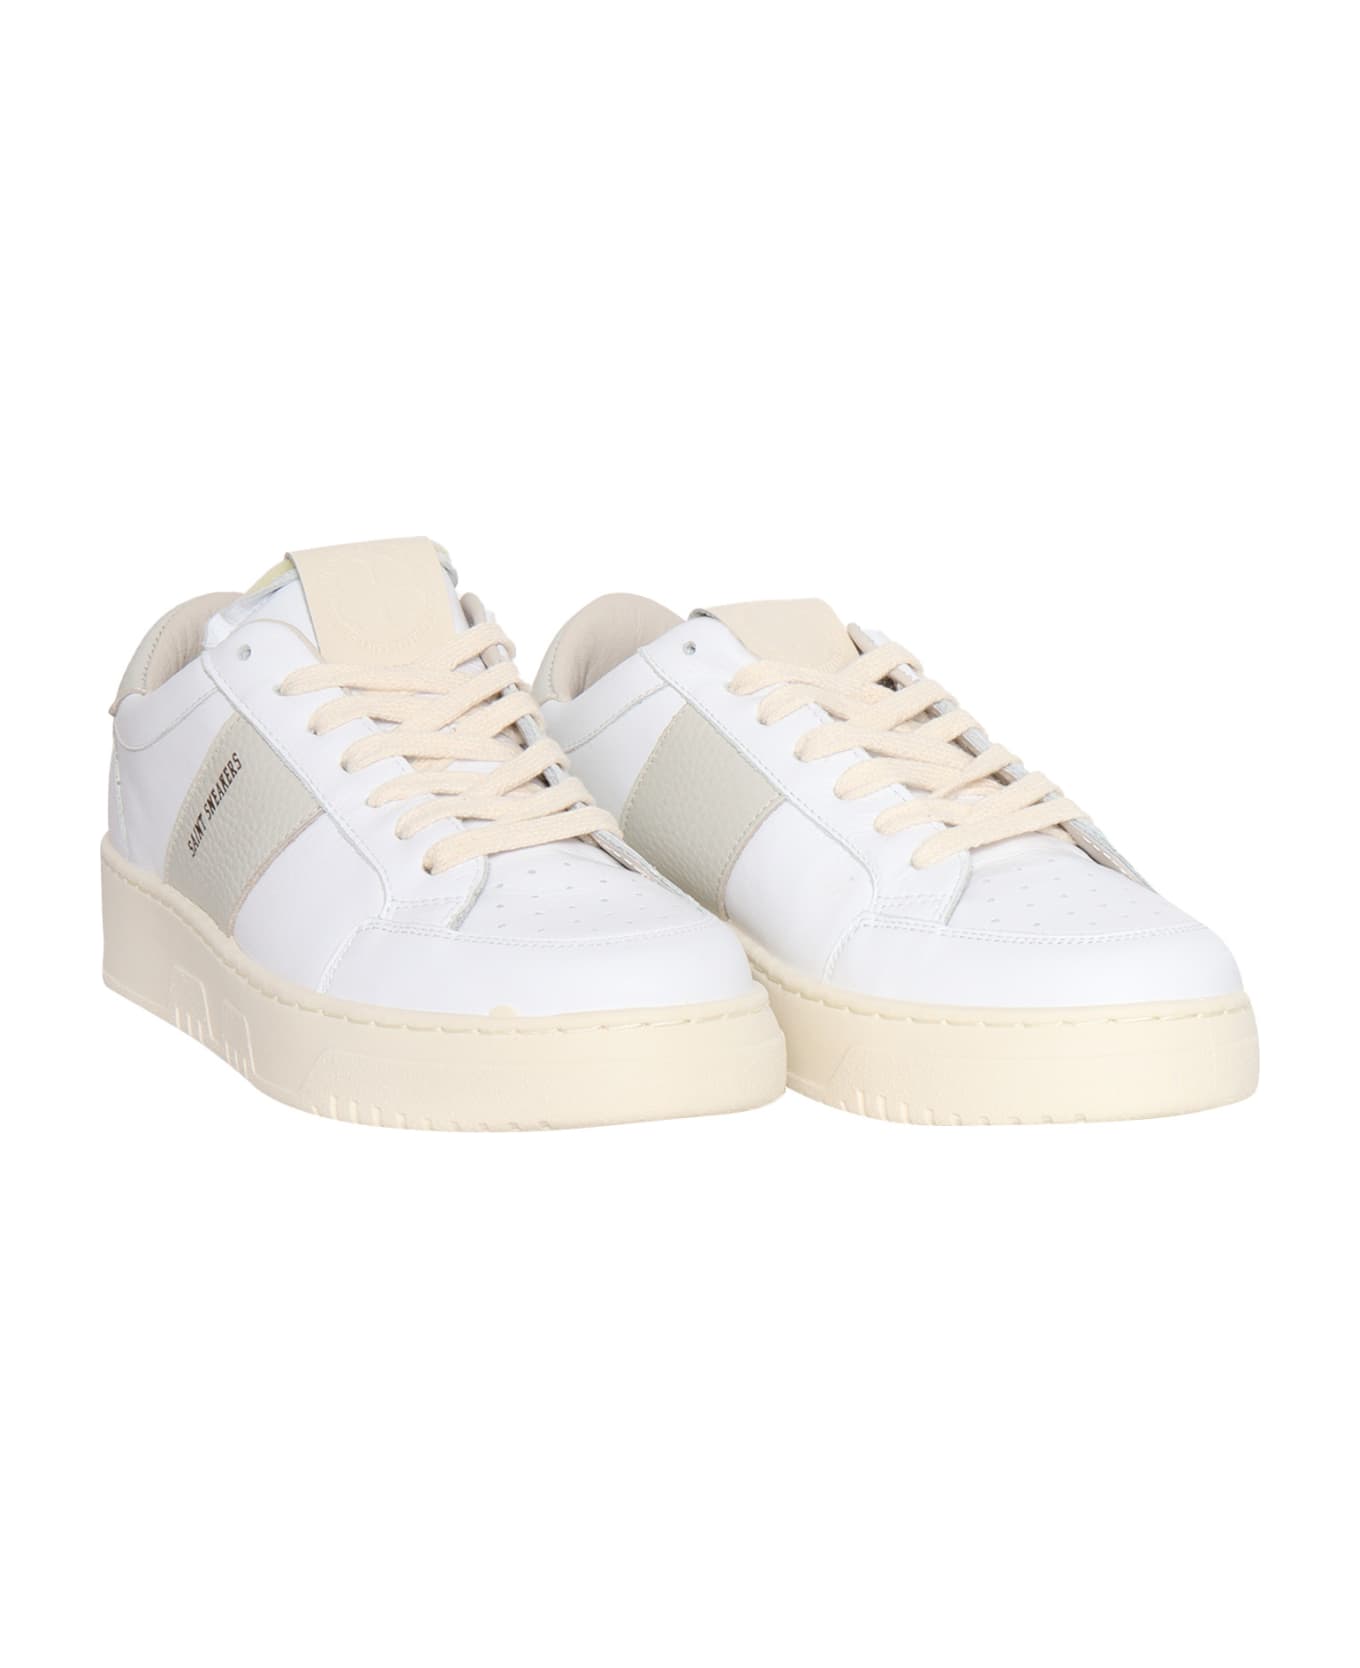 Saint Sneakers White Leather Tennis Sneakers - WHITE スニーカー